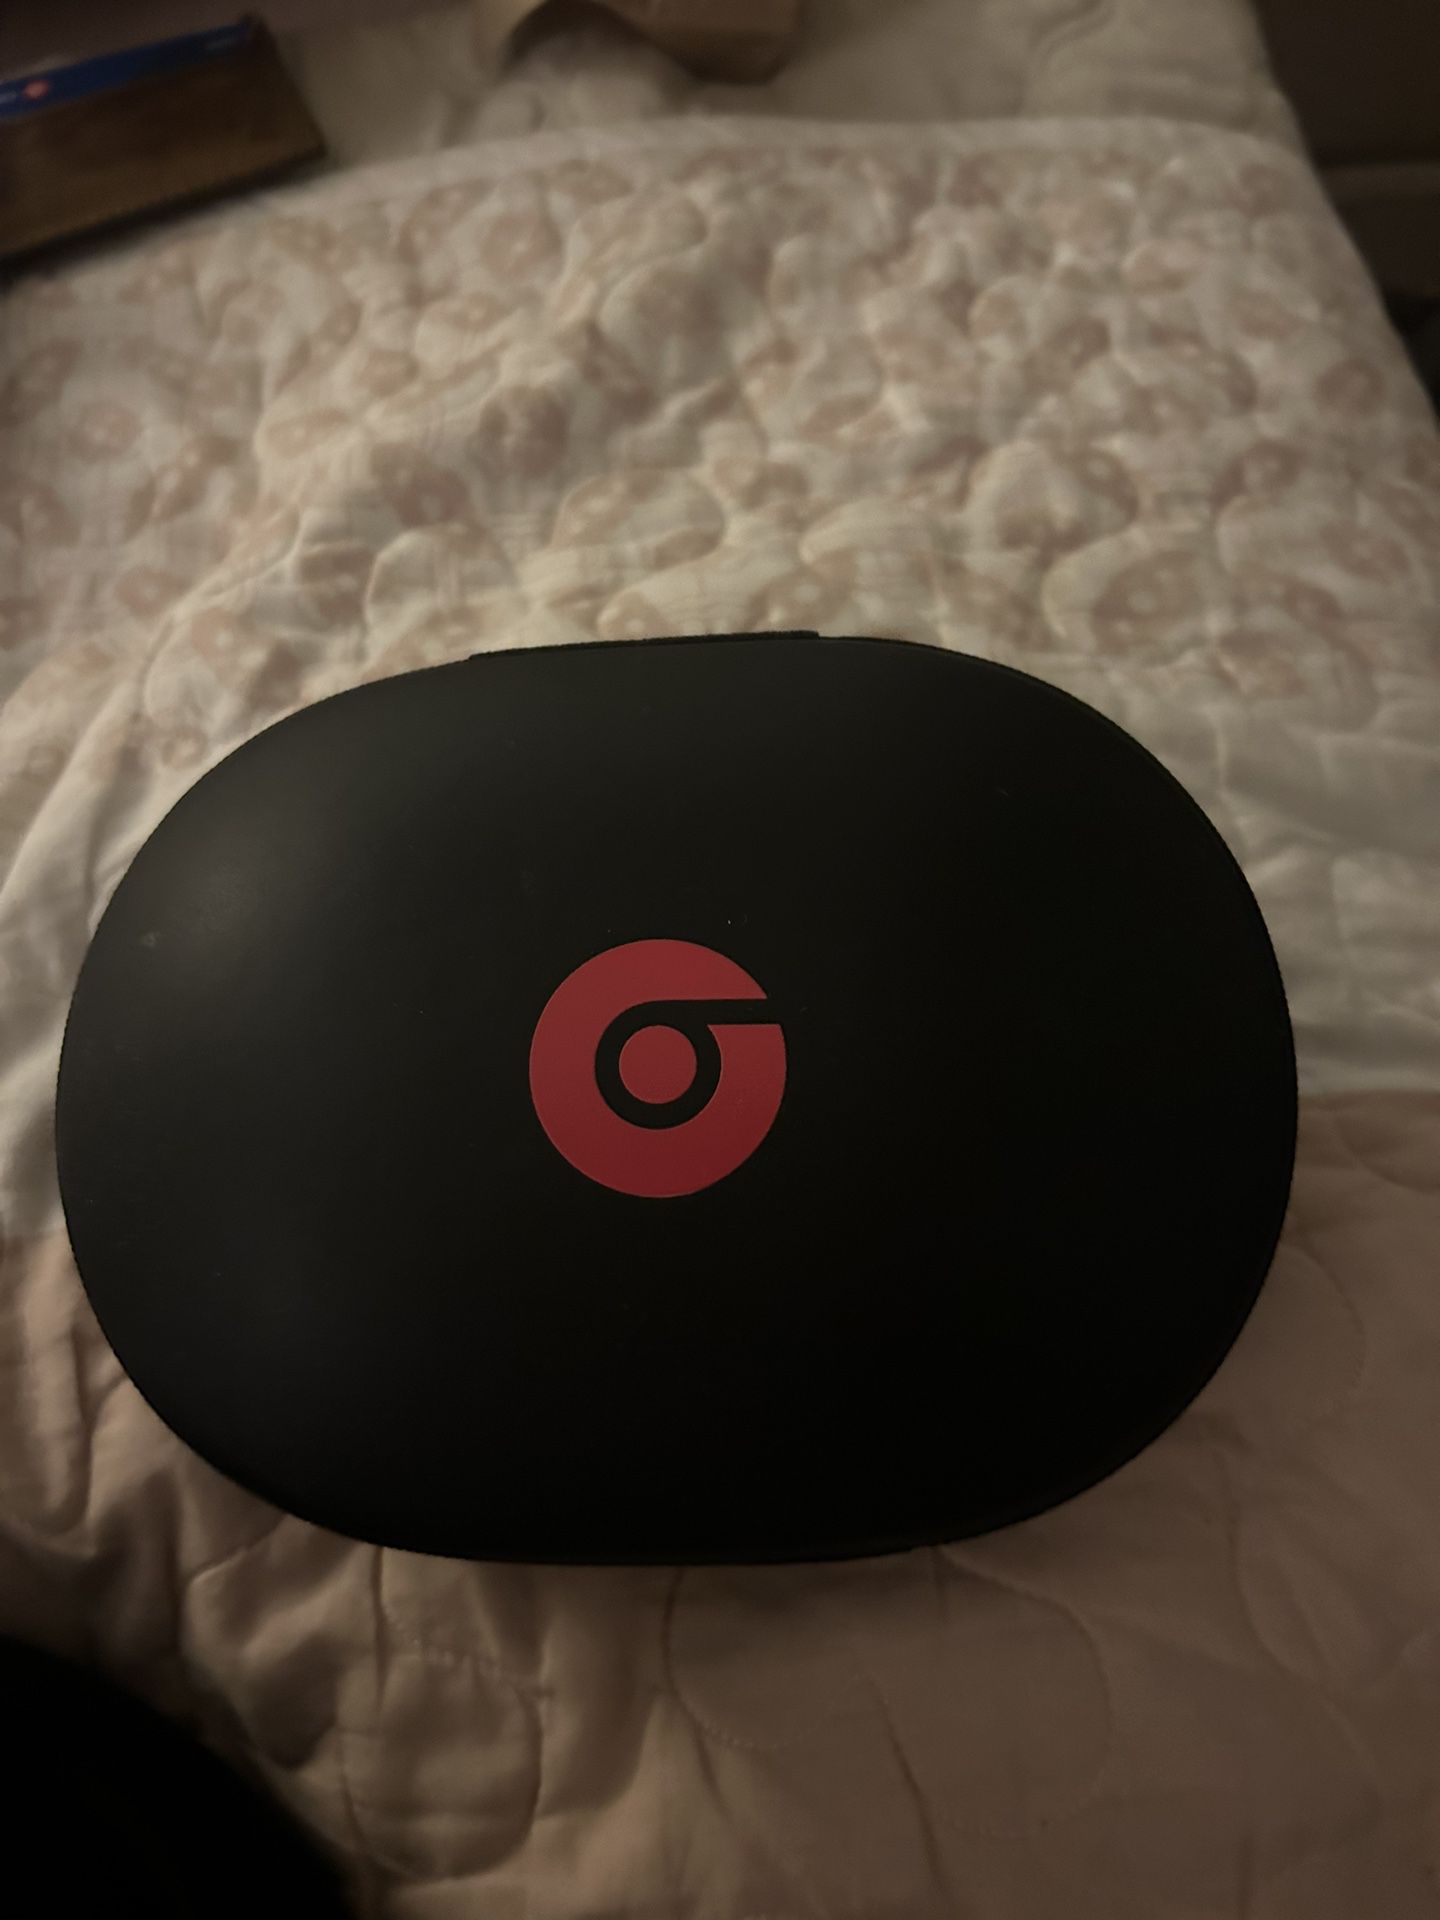 Beats Studio Wireless Pro. Or Trade For Fake Air Pods Pro. 